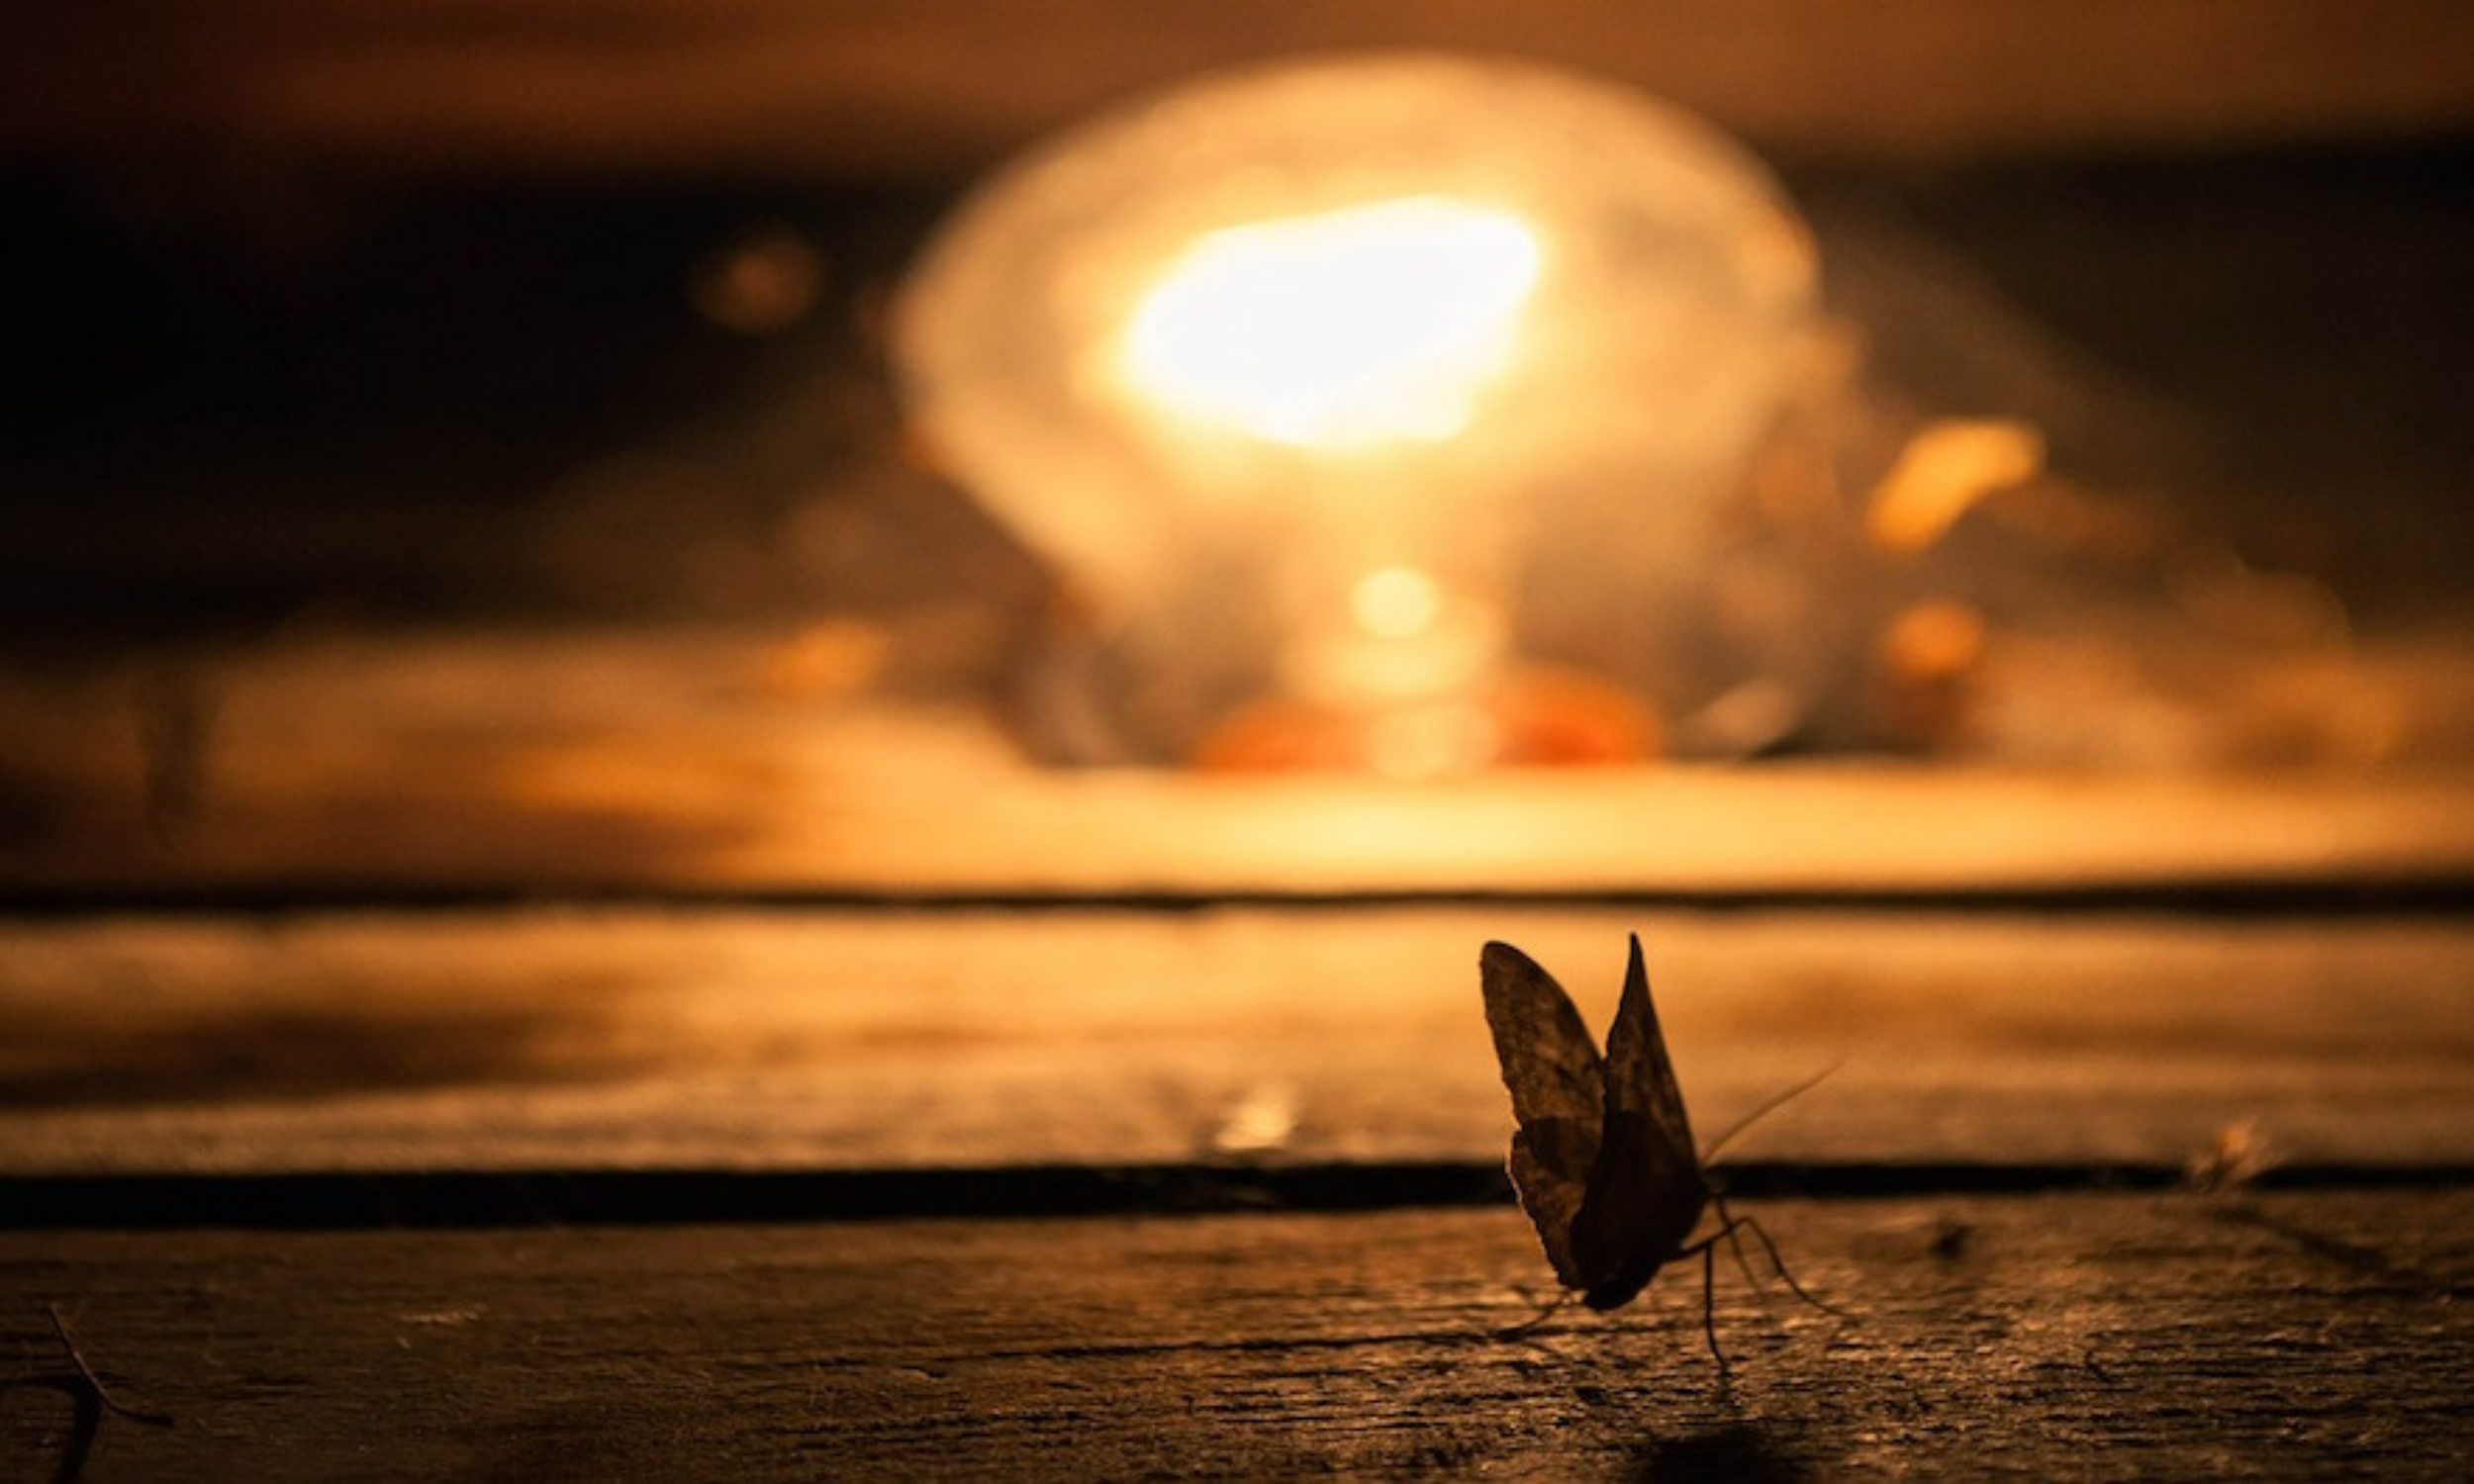 A butterfly in front of a lightbulb